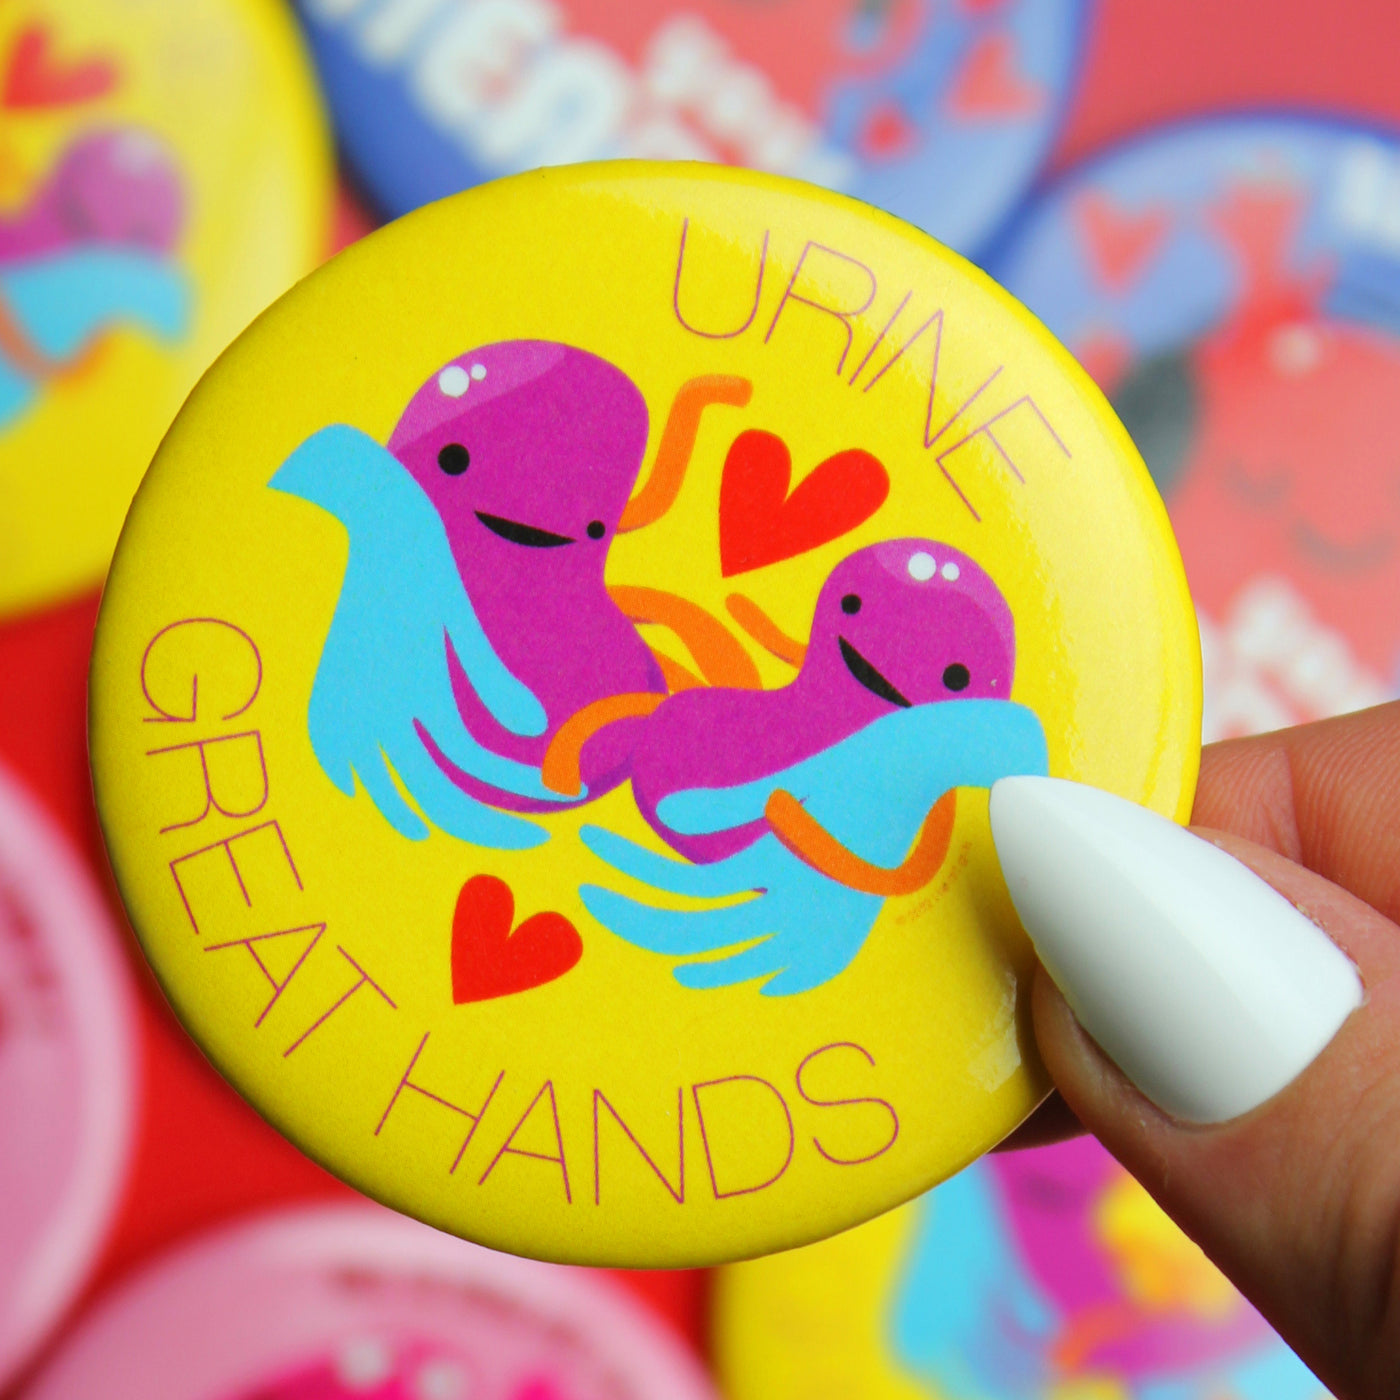 Urine Great Hands Kidneys Magnet | Kidney Donor Transplant Surgery Gift, Cute Organ Donor Awareness